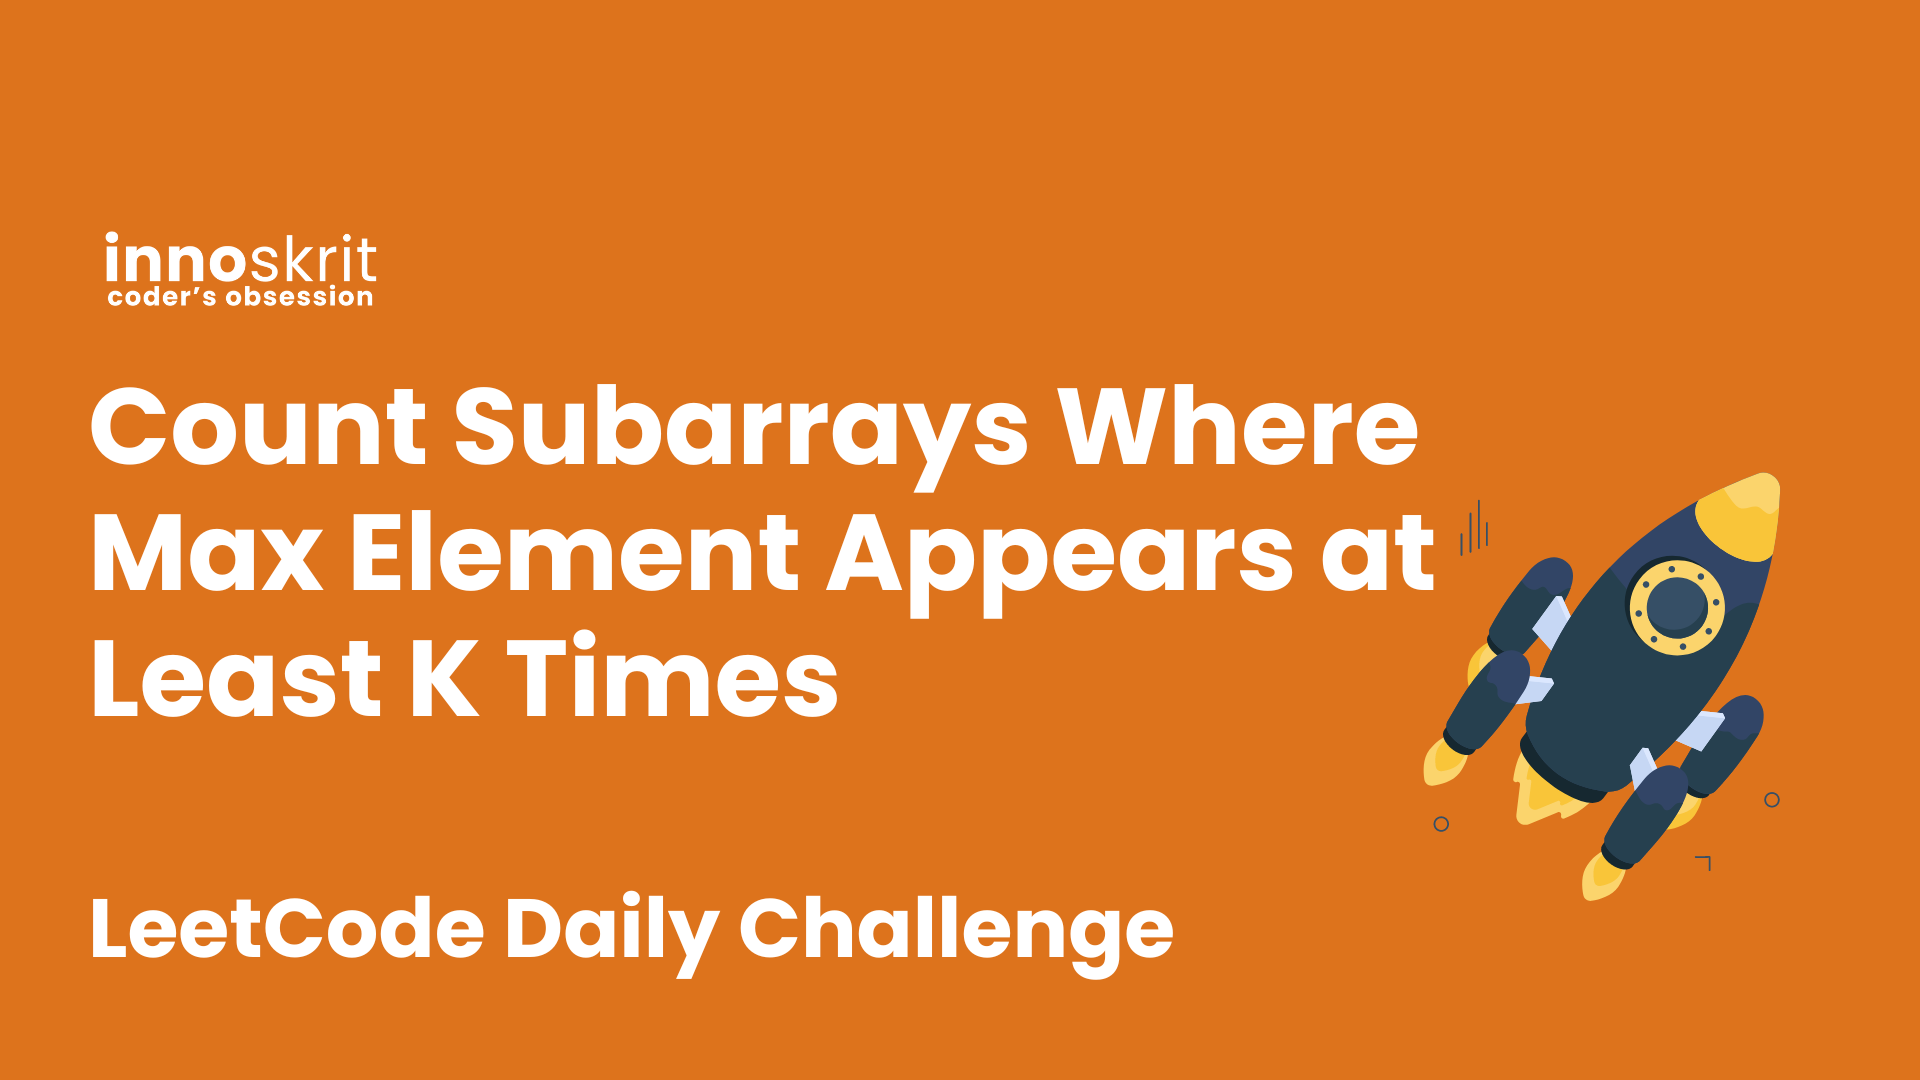 Count Subarrays Where Max Element Appears at Least K Times - LeetCode Daily Challenge